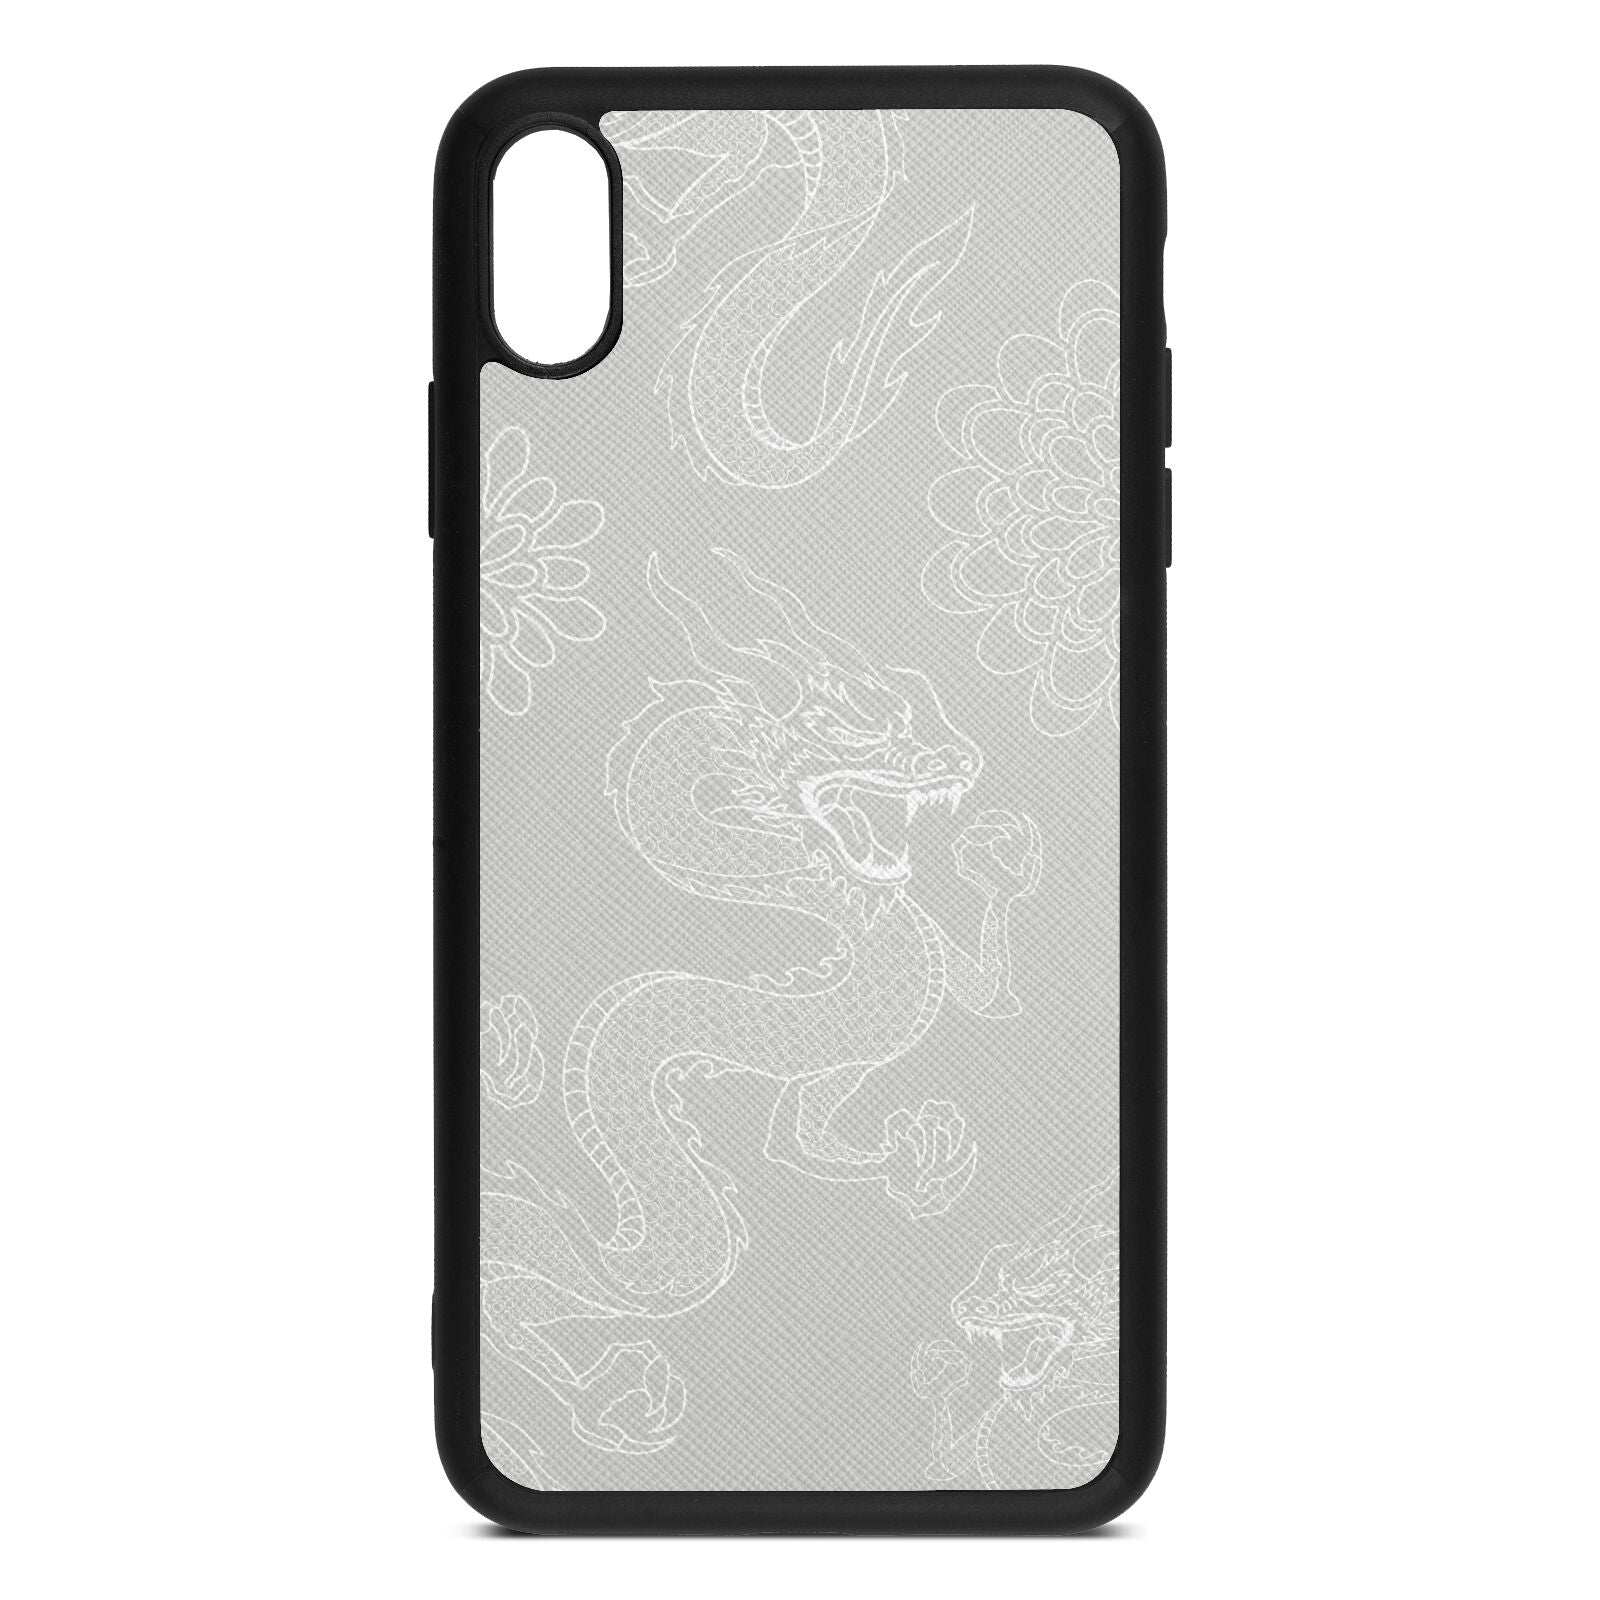 Dragons Silver Saffiano Leather iPhone Xs Max Case